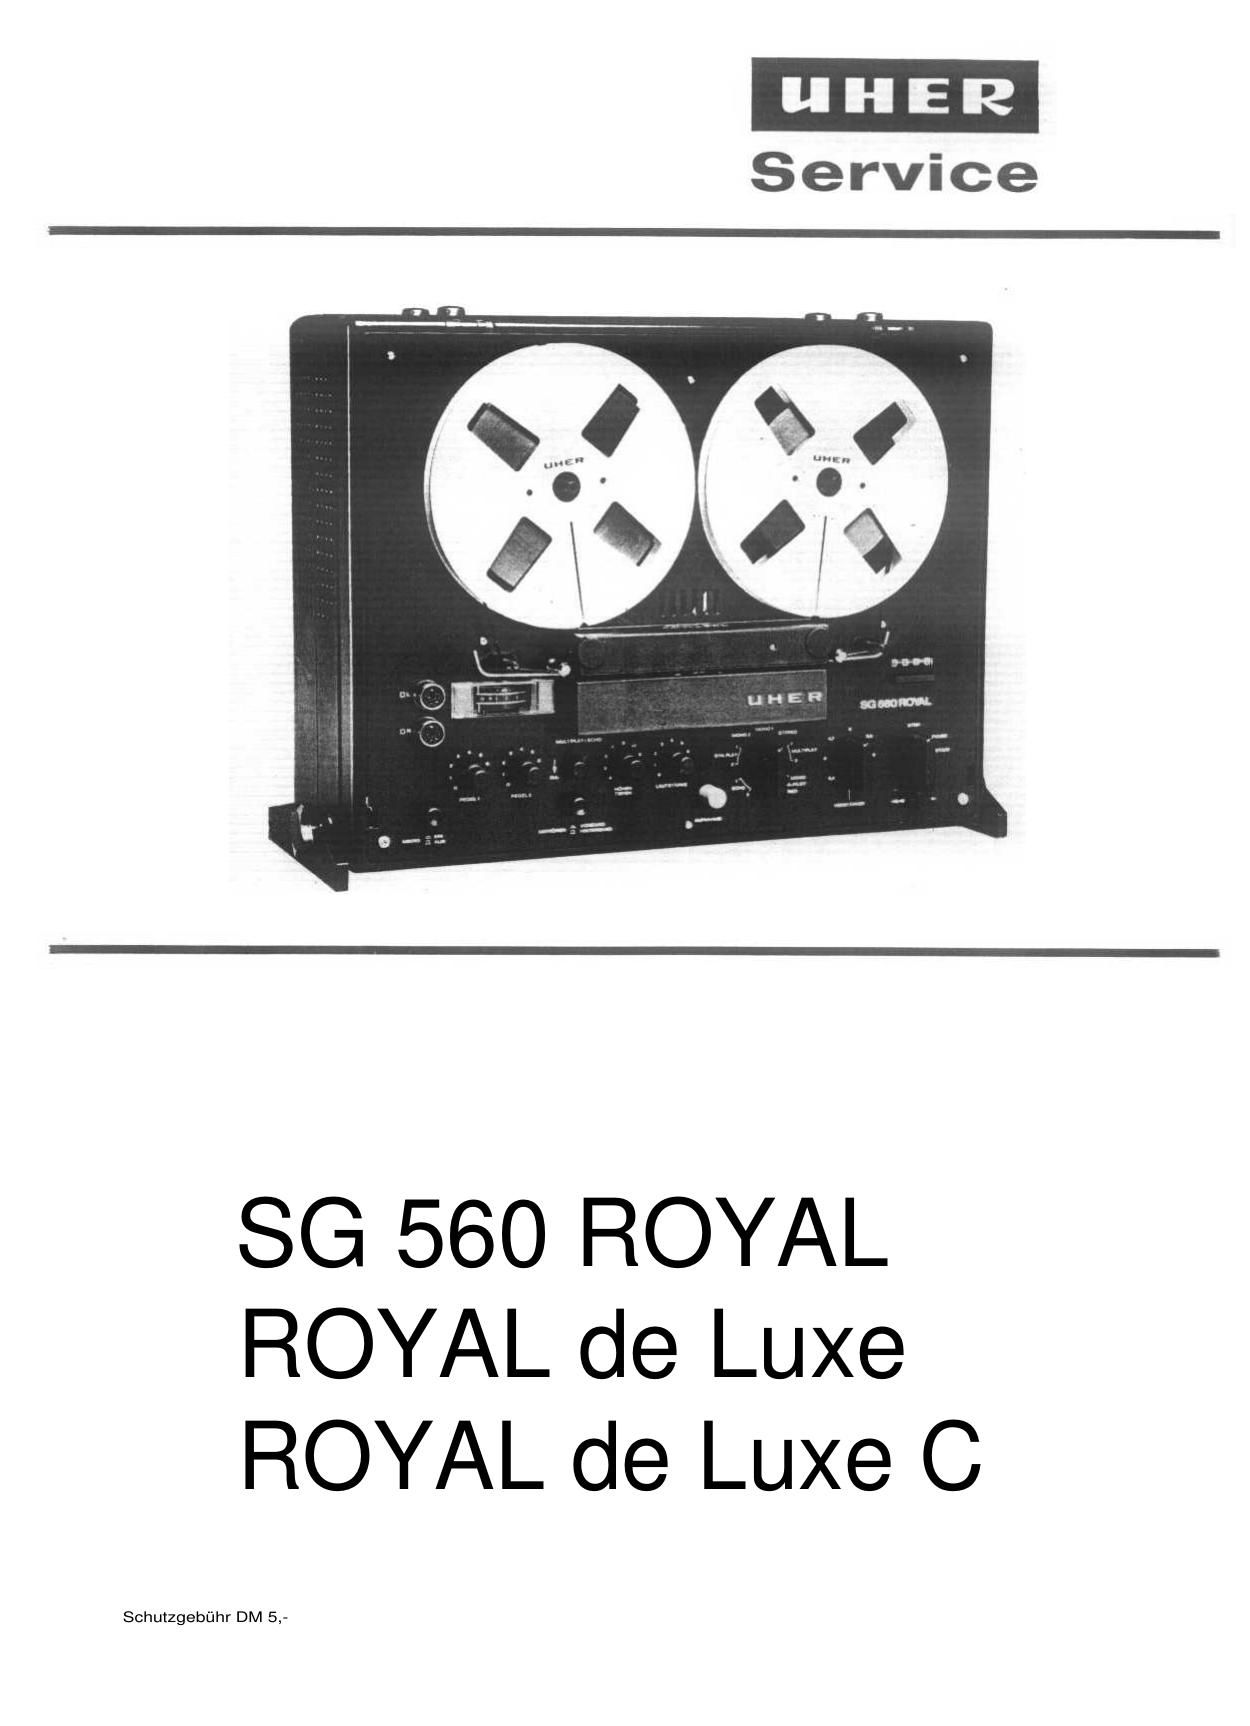 Uher Royal Deluxe Service Manual